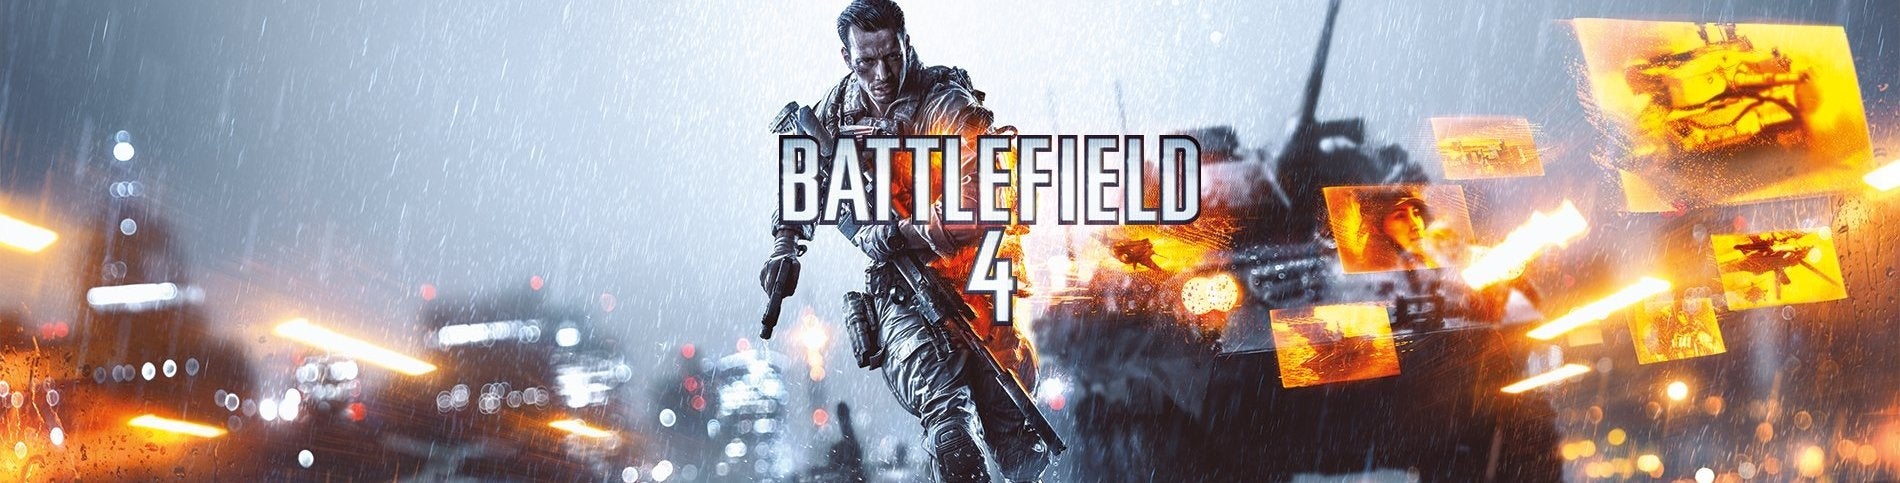 Image for Battlefield 4: The redefinition of Early Access